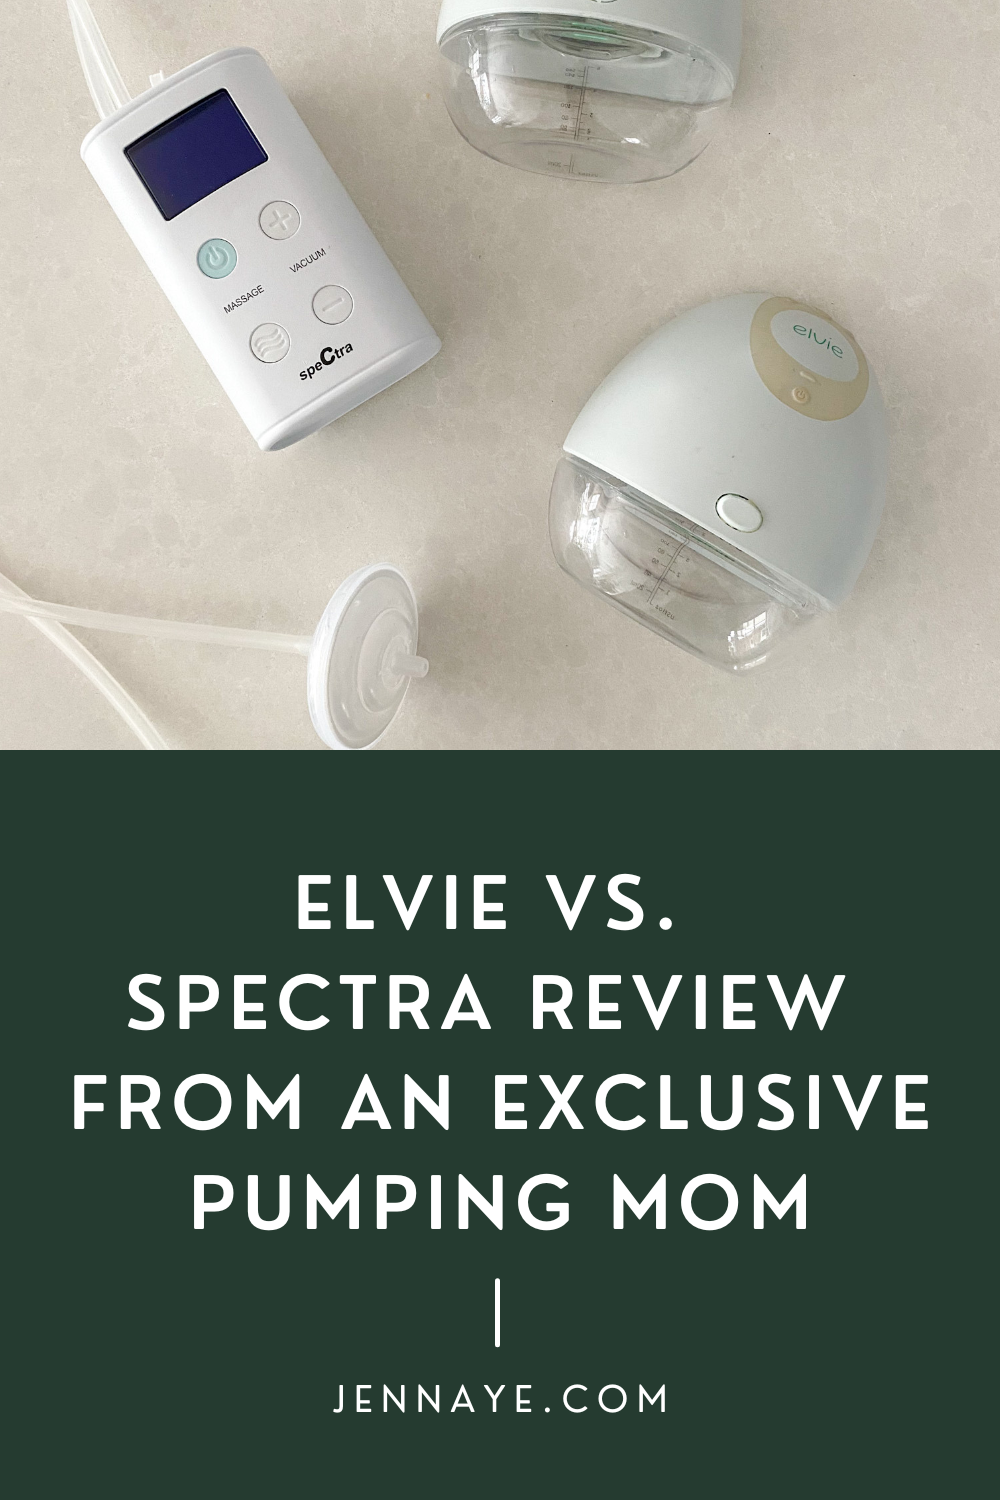 Elvie vs. Spectra Review from an Exclusive Pumping Mom